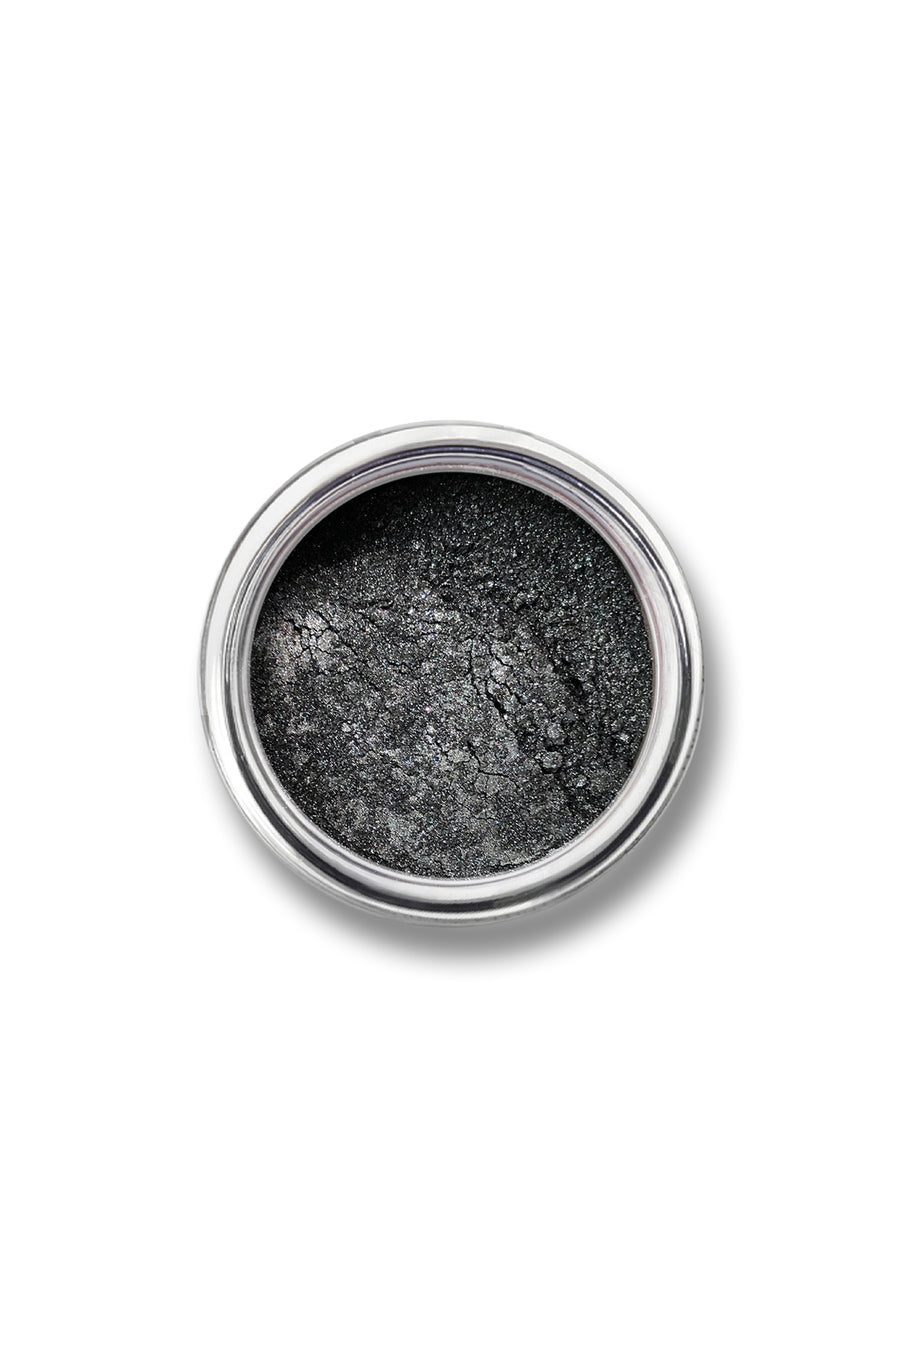 Shimmer Eyeshadow #49 - Charcoal - Blend Mineral Cosmetics